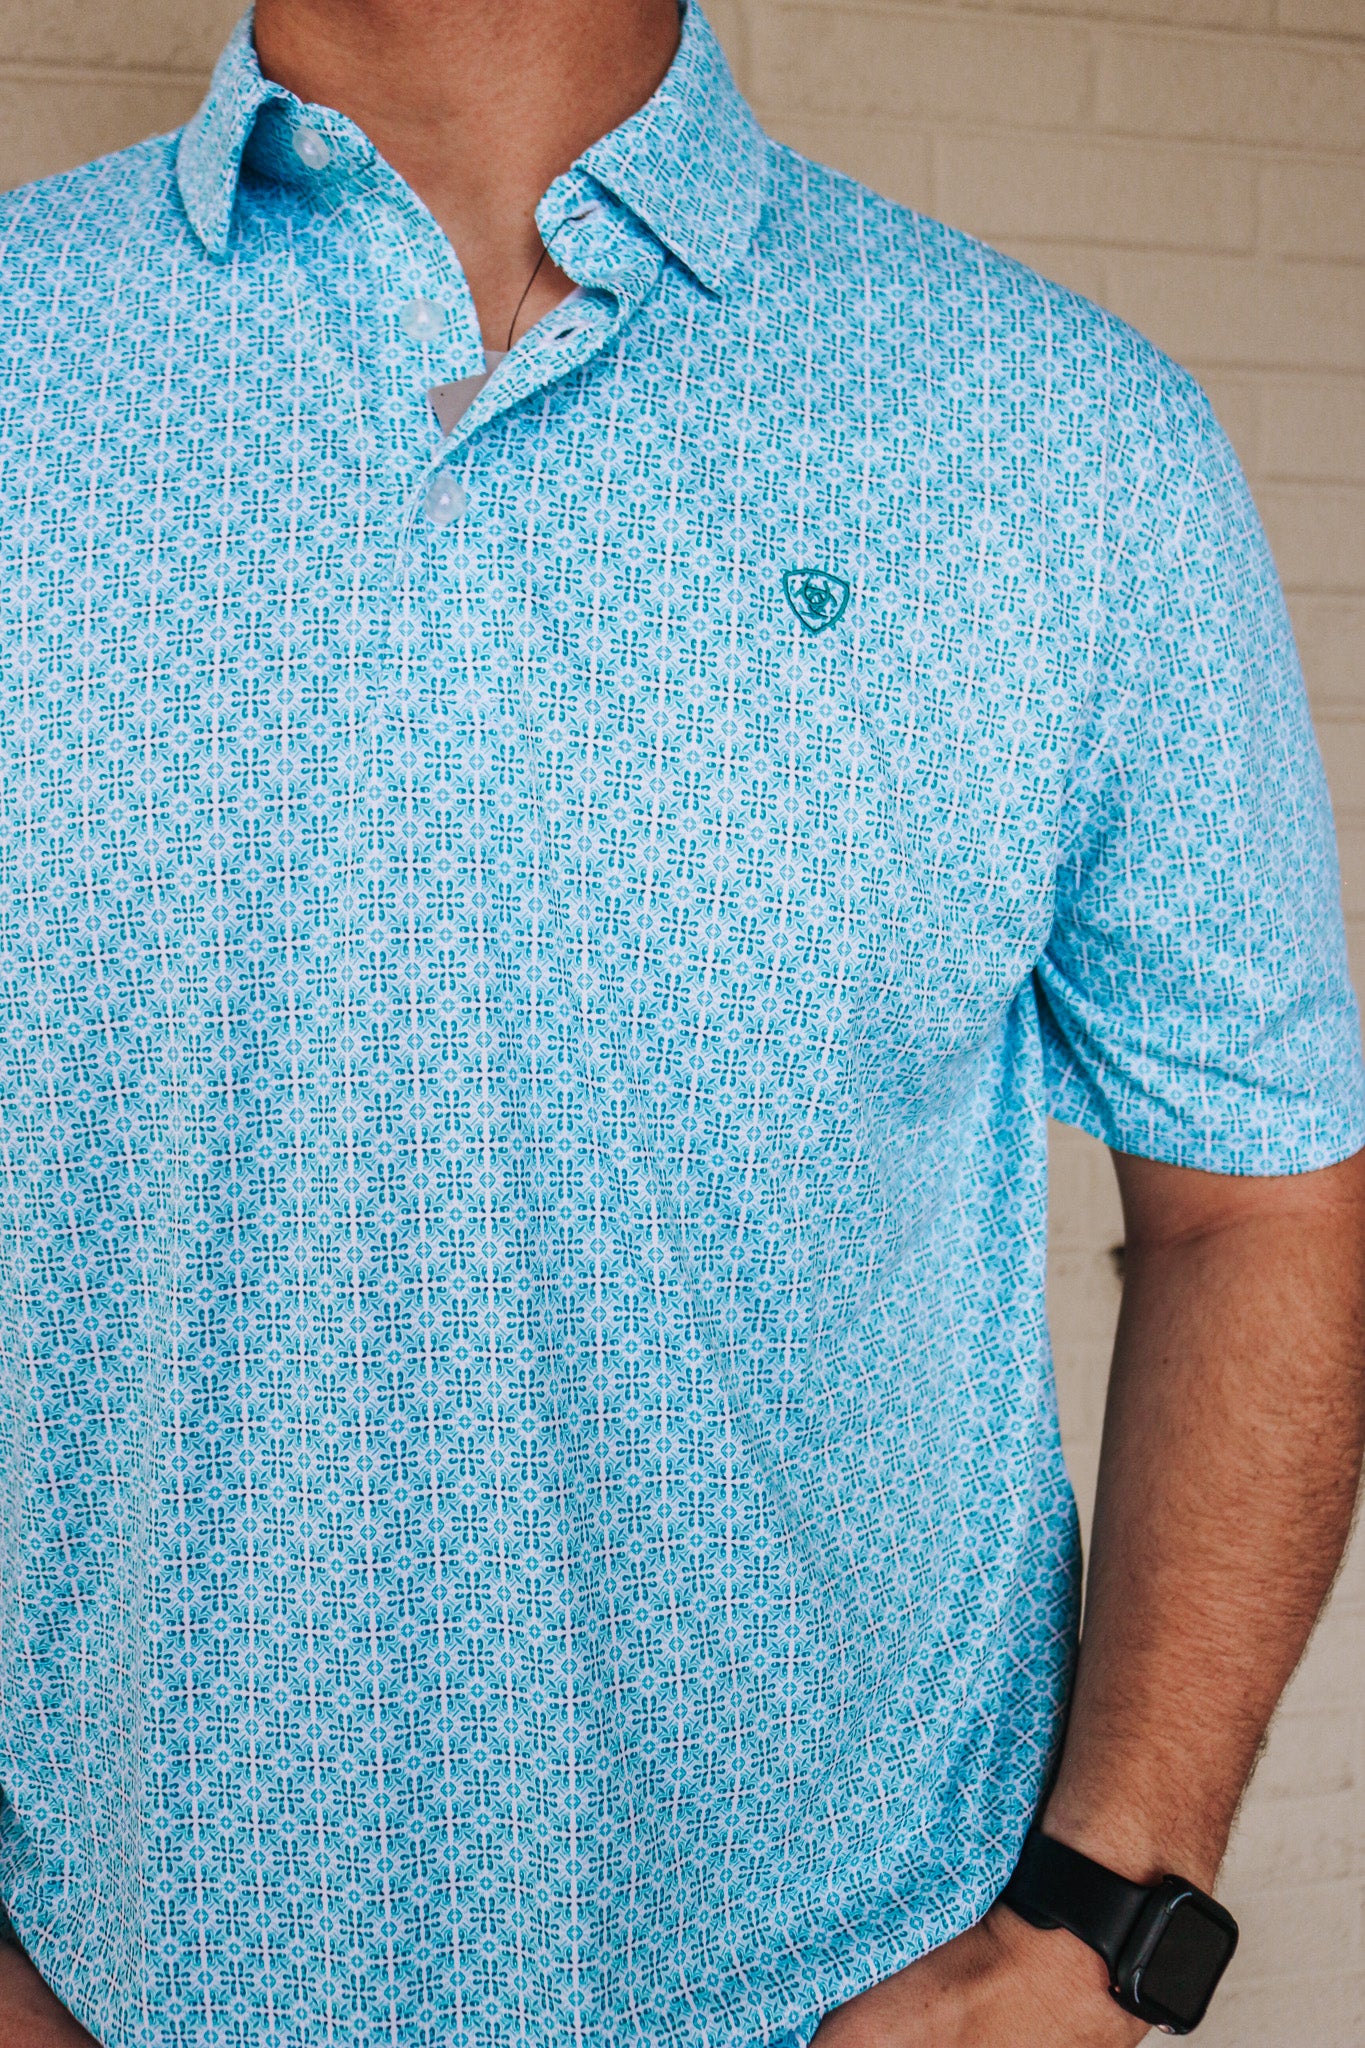 Ariat Men's All Over Print Polo- Lake Blue